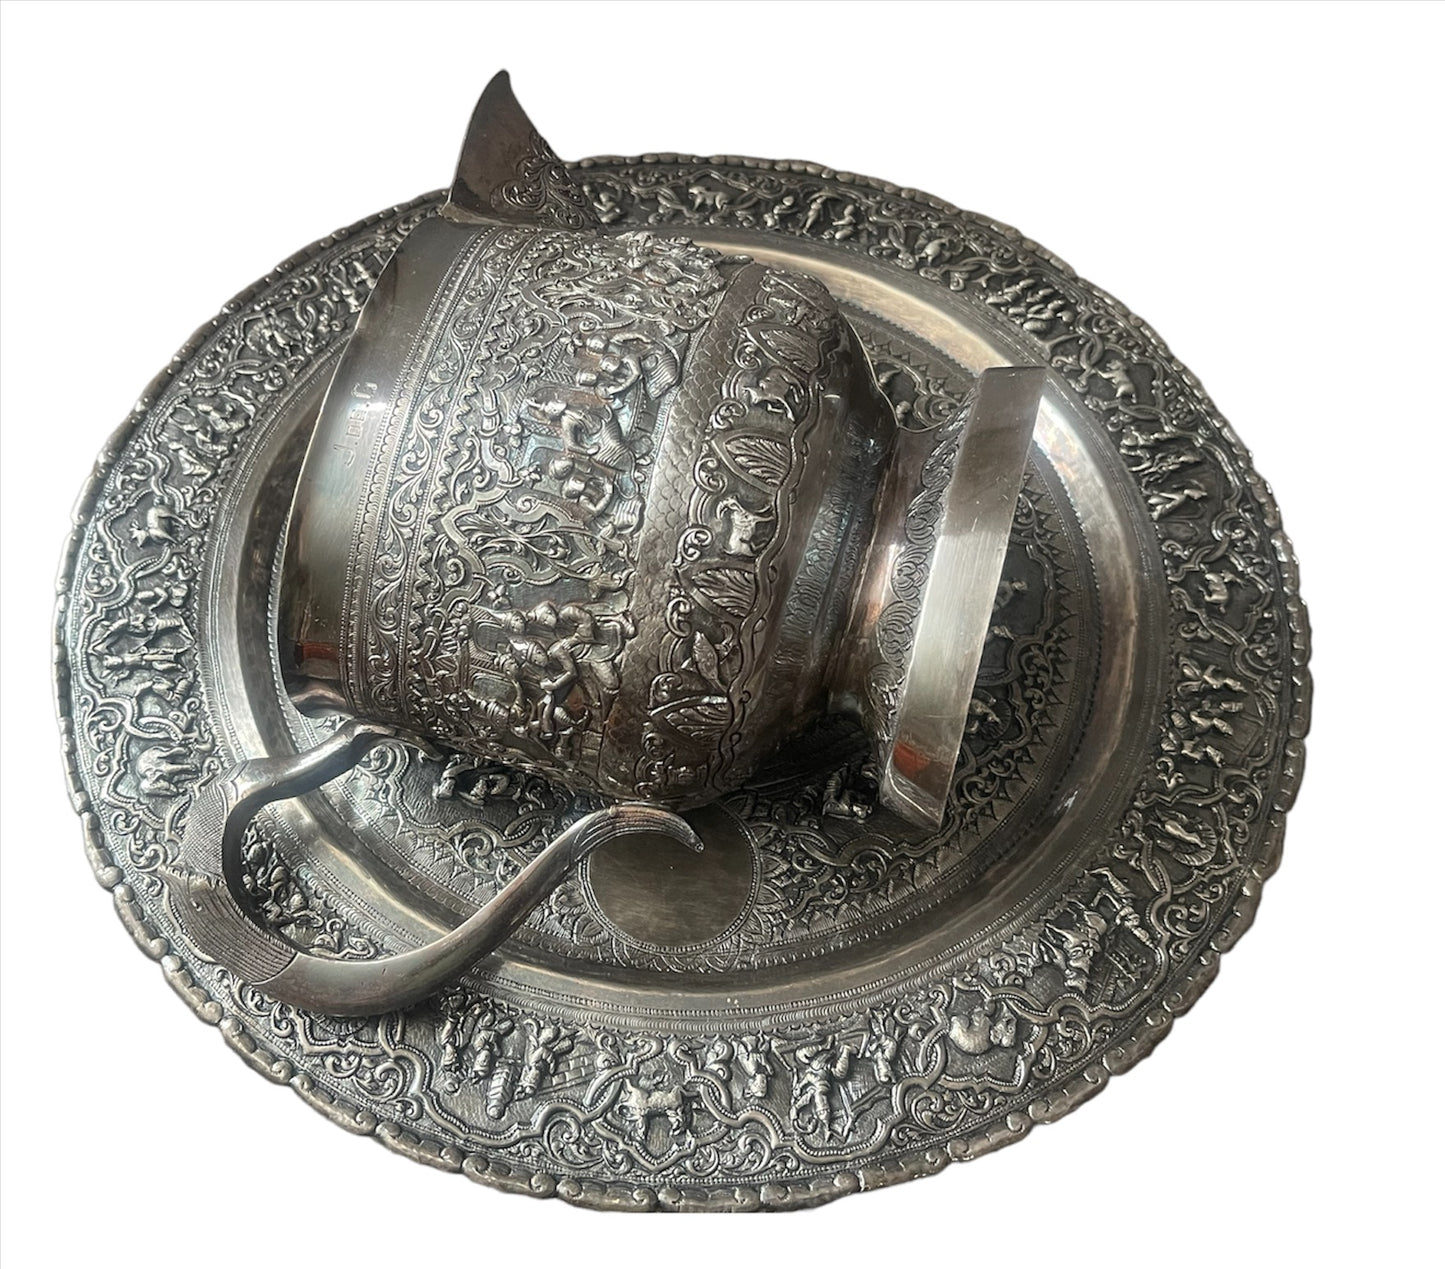 A Burmese antique elaborately carved circular tray and oval shaped jug with a pointed mug.